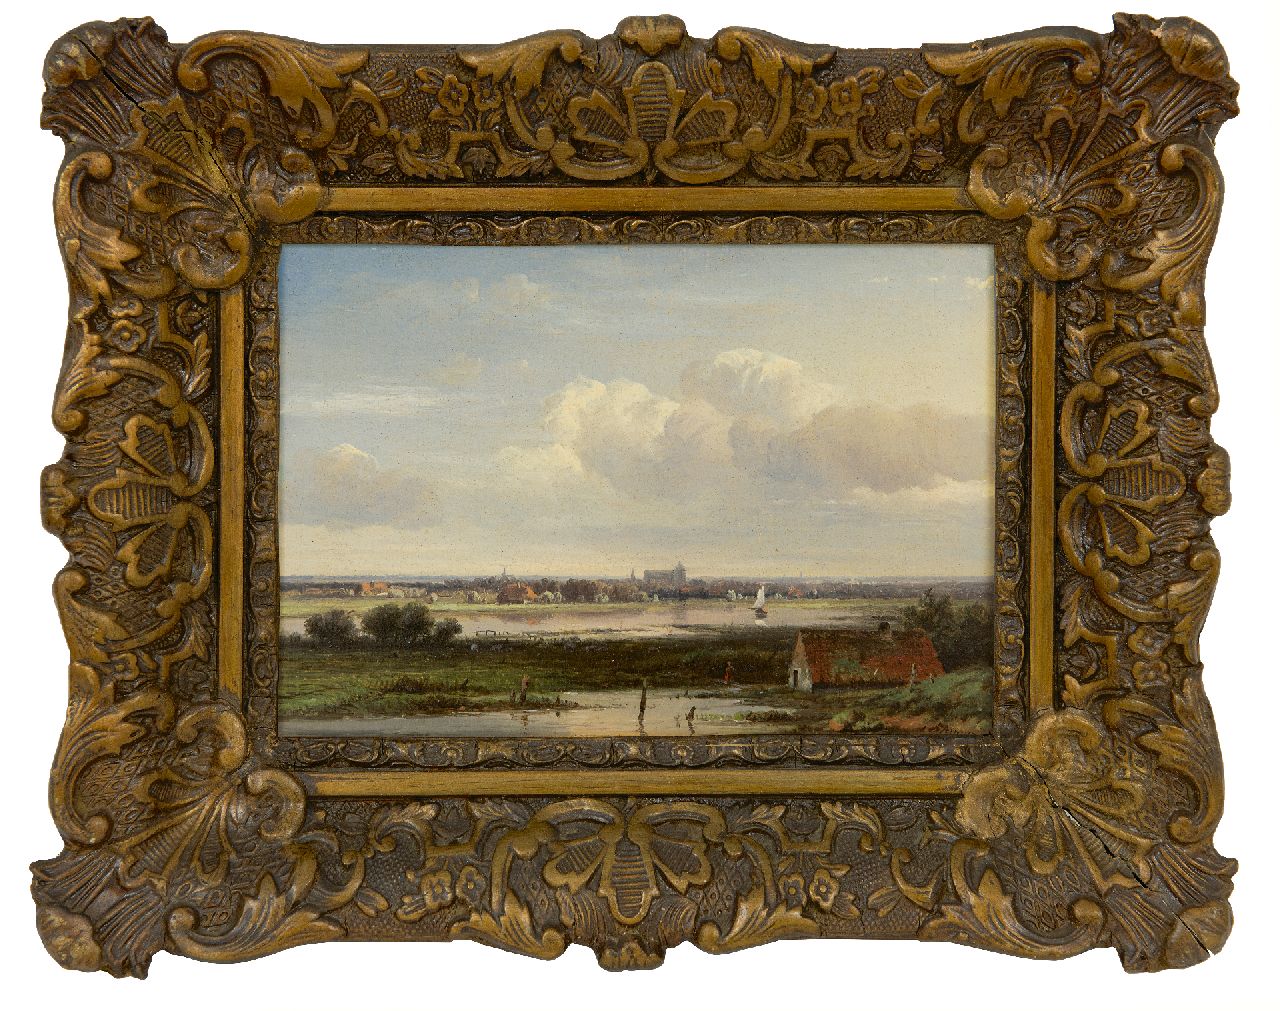 Kluyver P.L.F.  | 'Pieter' Lodewijk Francisco Kluyver | Paintings offered for sale | Vast river landscape with a village in the distance, oil on panel 13.6 x 18.4 cm, signed l.r.